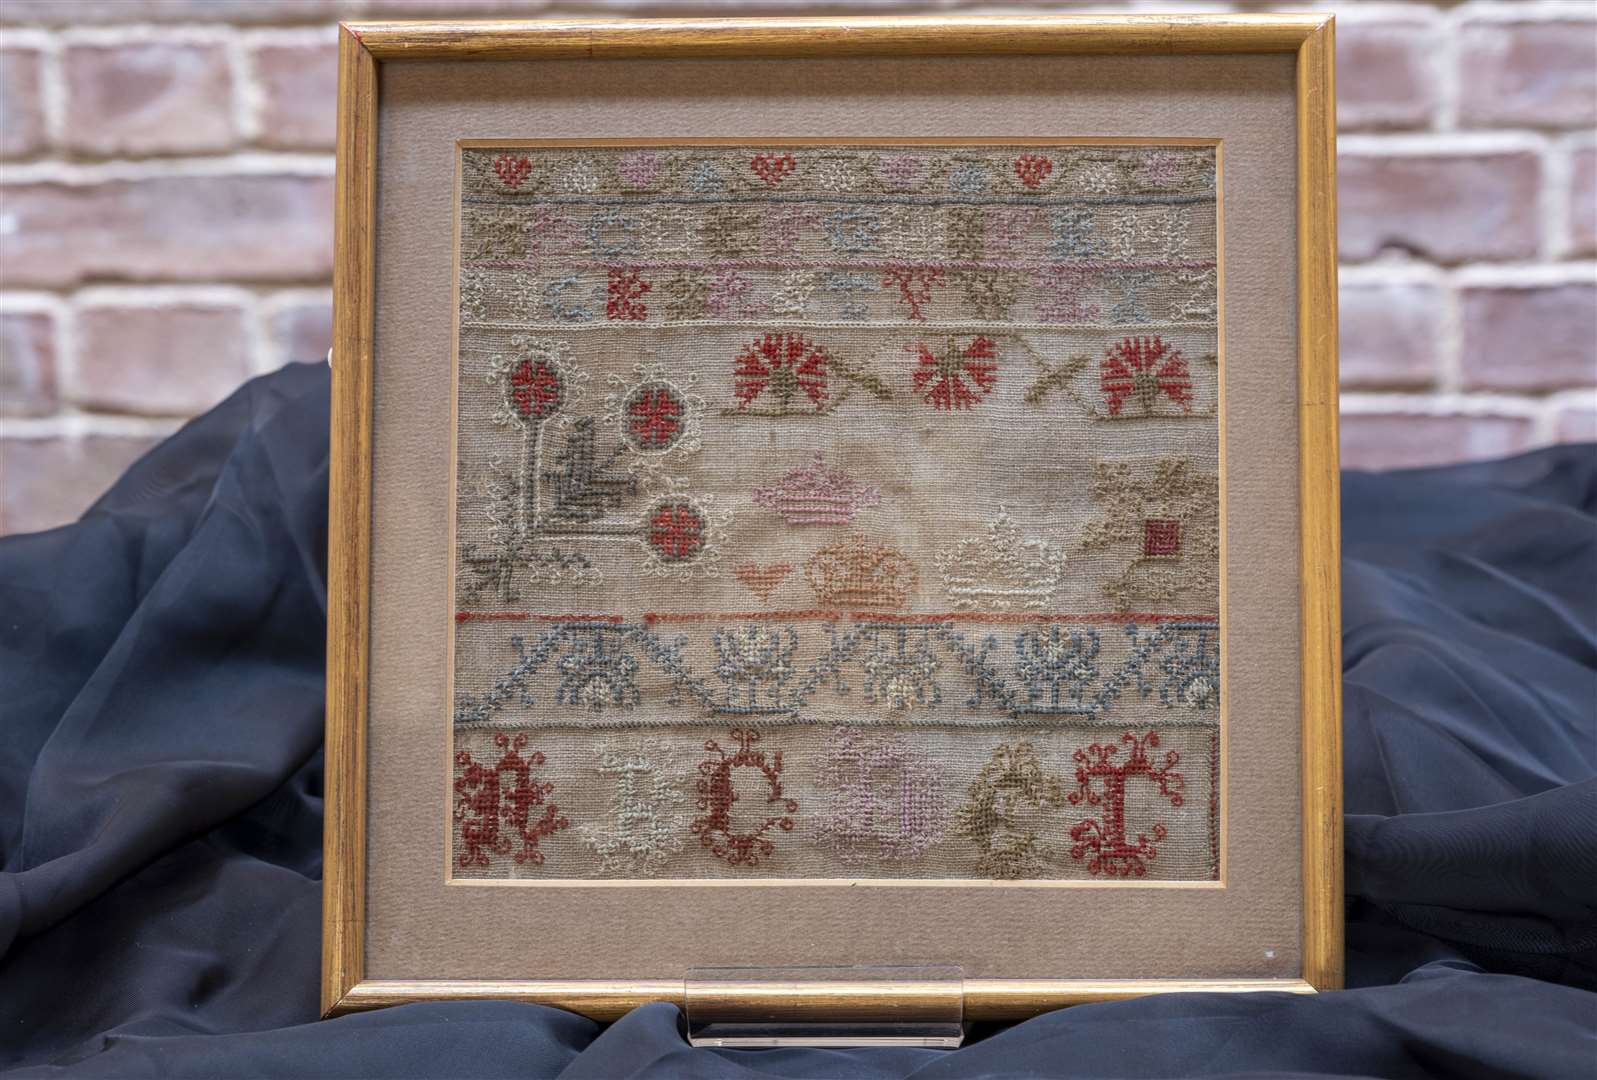 The sampler created by Robert Burns’s youngest sister Isabella Burns (Peter Devlin/National Trust for Scotland/PA)